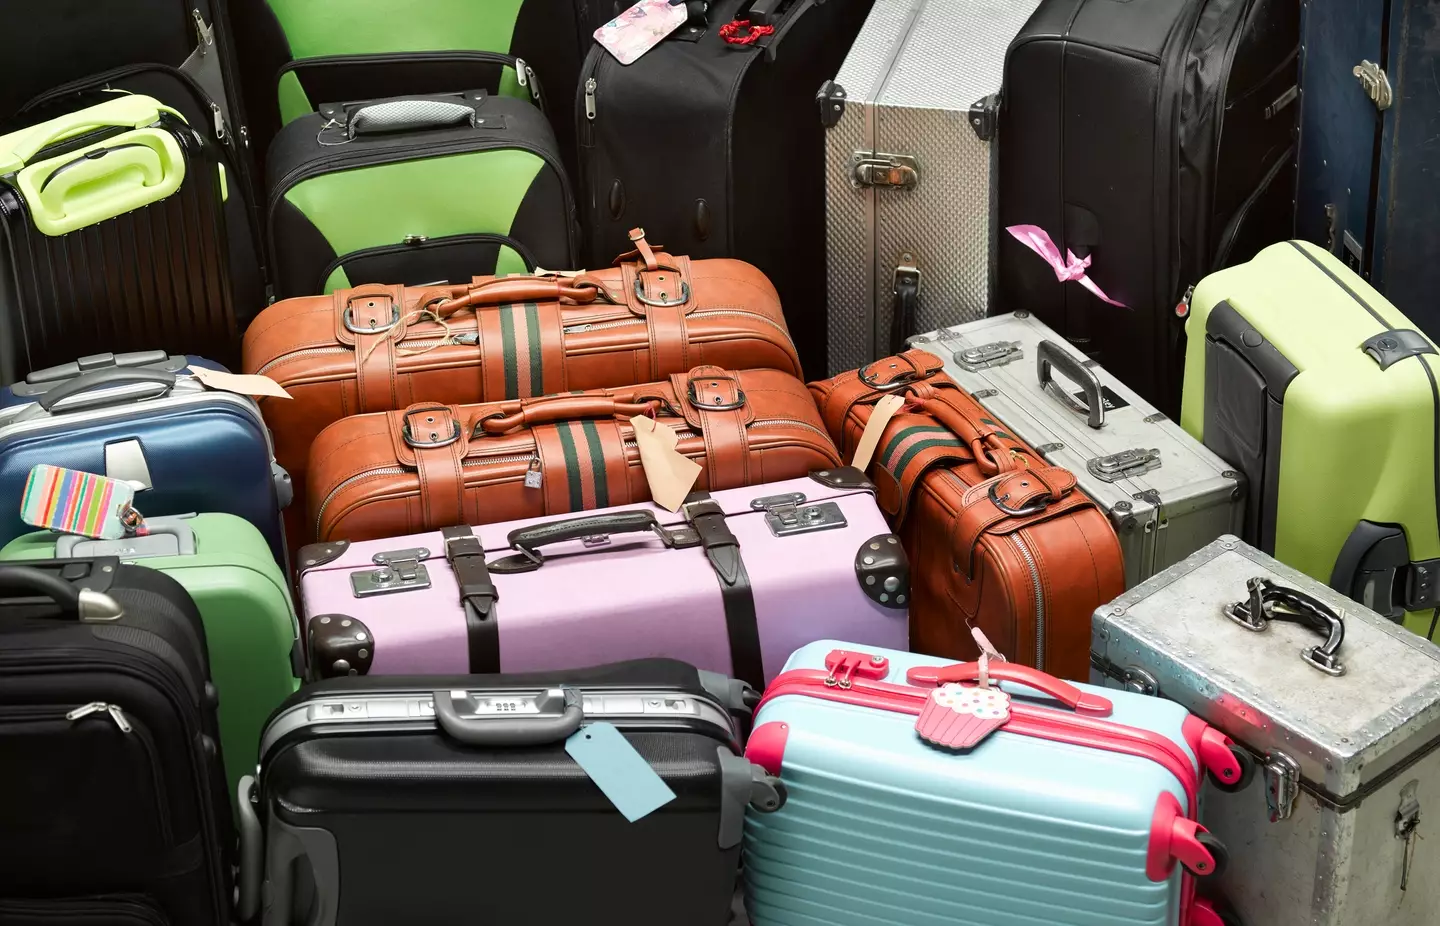 So many suitcases...